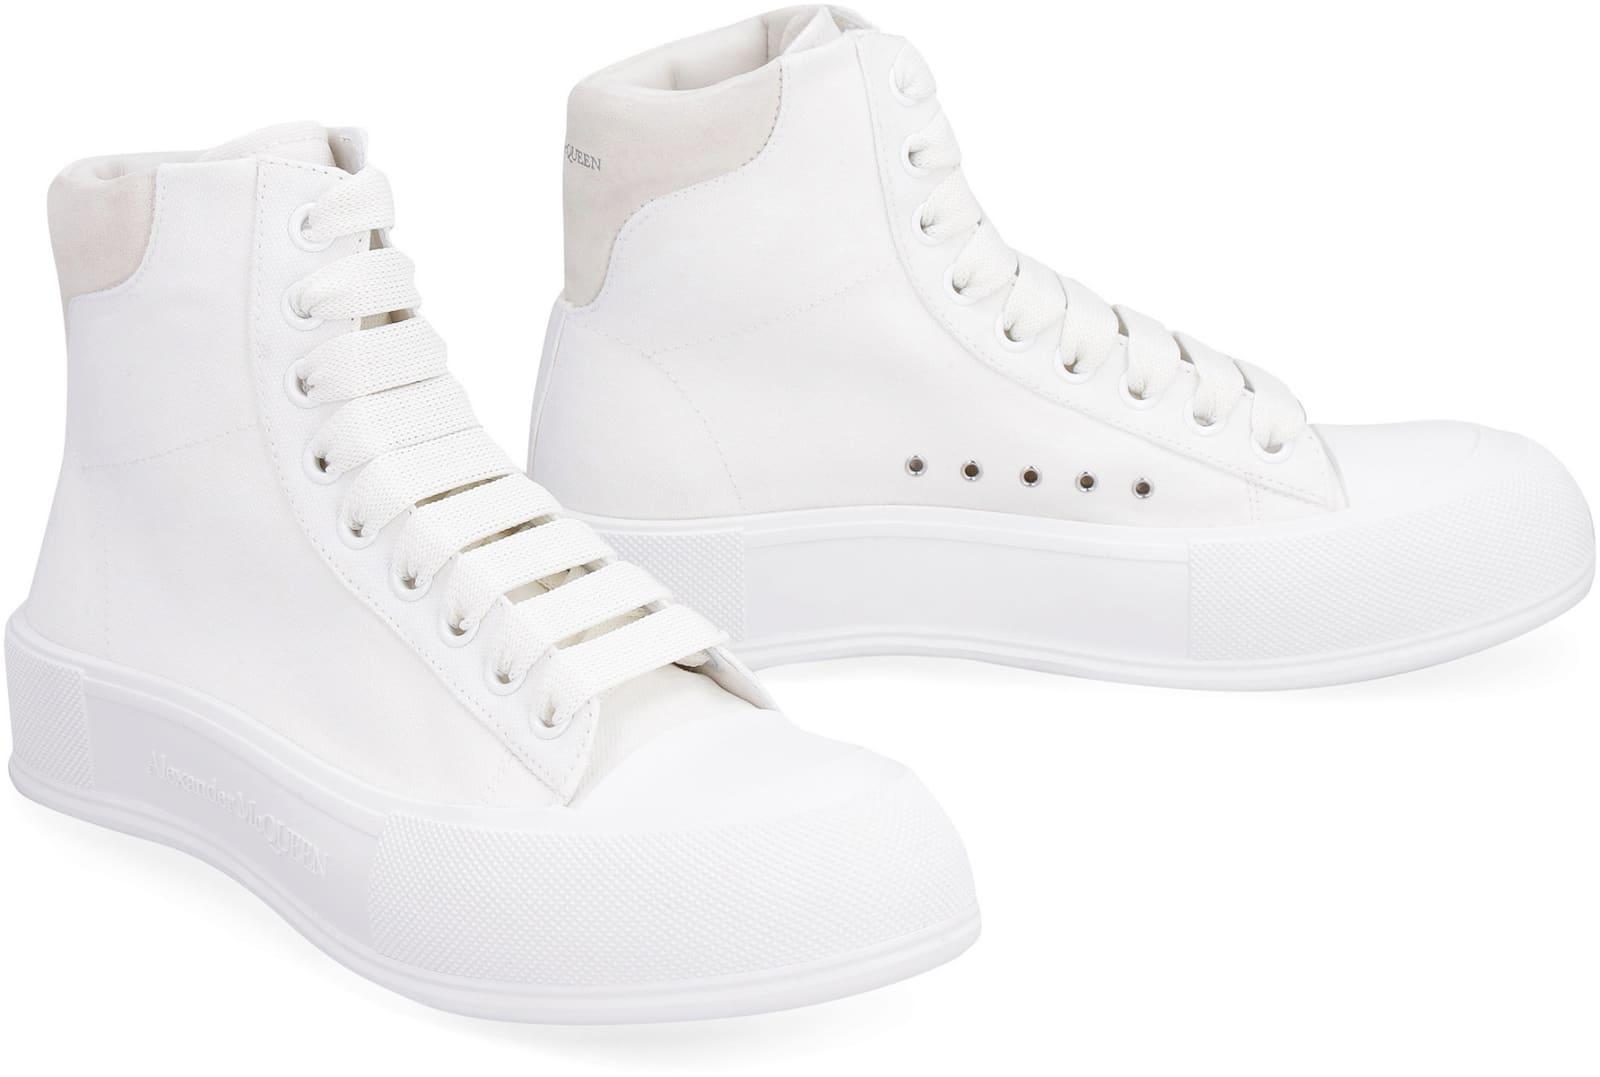 Alexander McQueen Suede Sneakers in White - Save 50% - Lyst